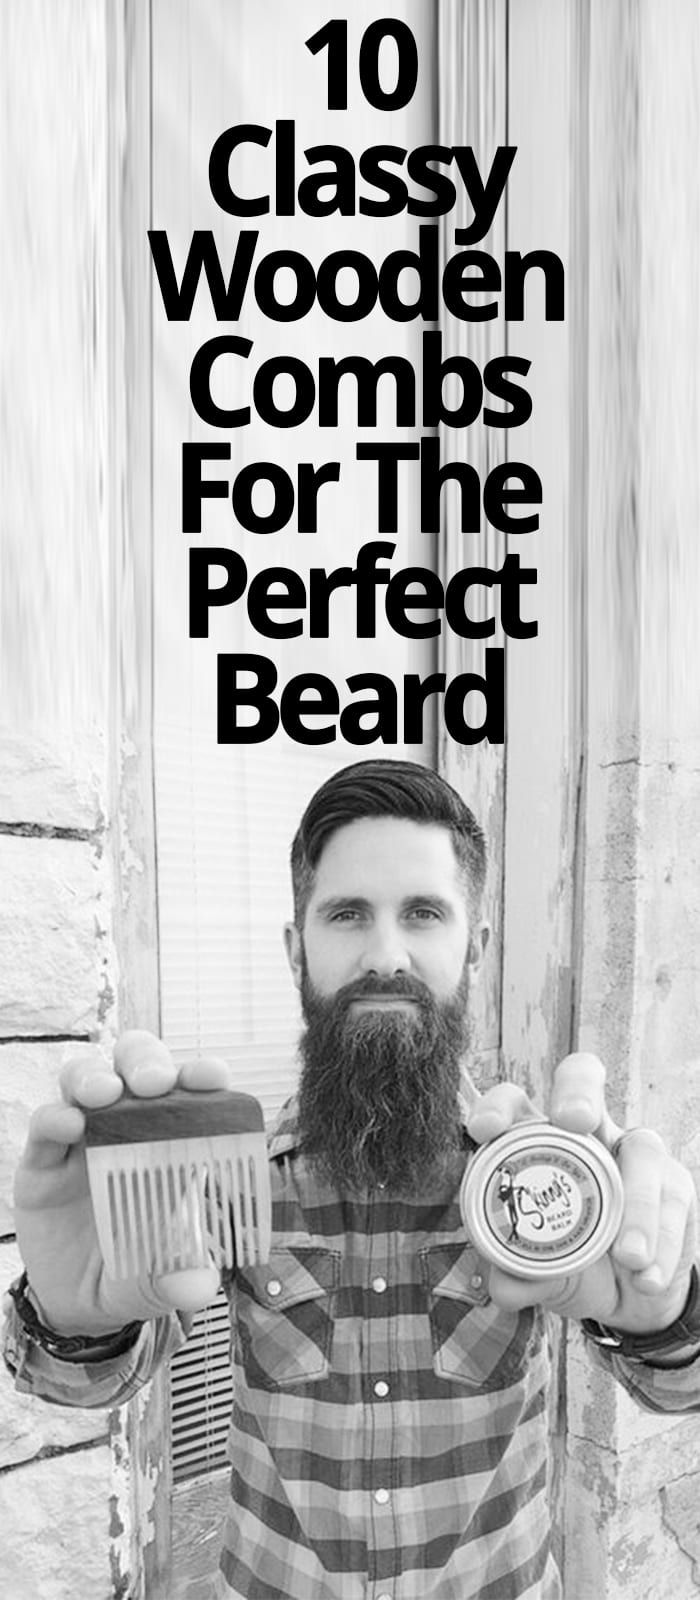 CLASSY WOODEN COMBS FOR THE PERFECT BEARD